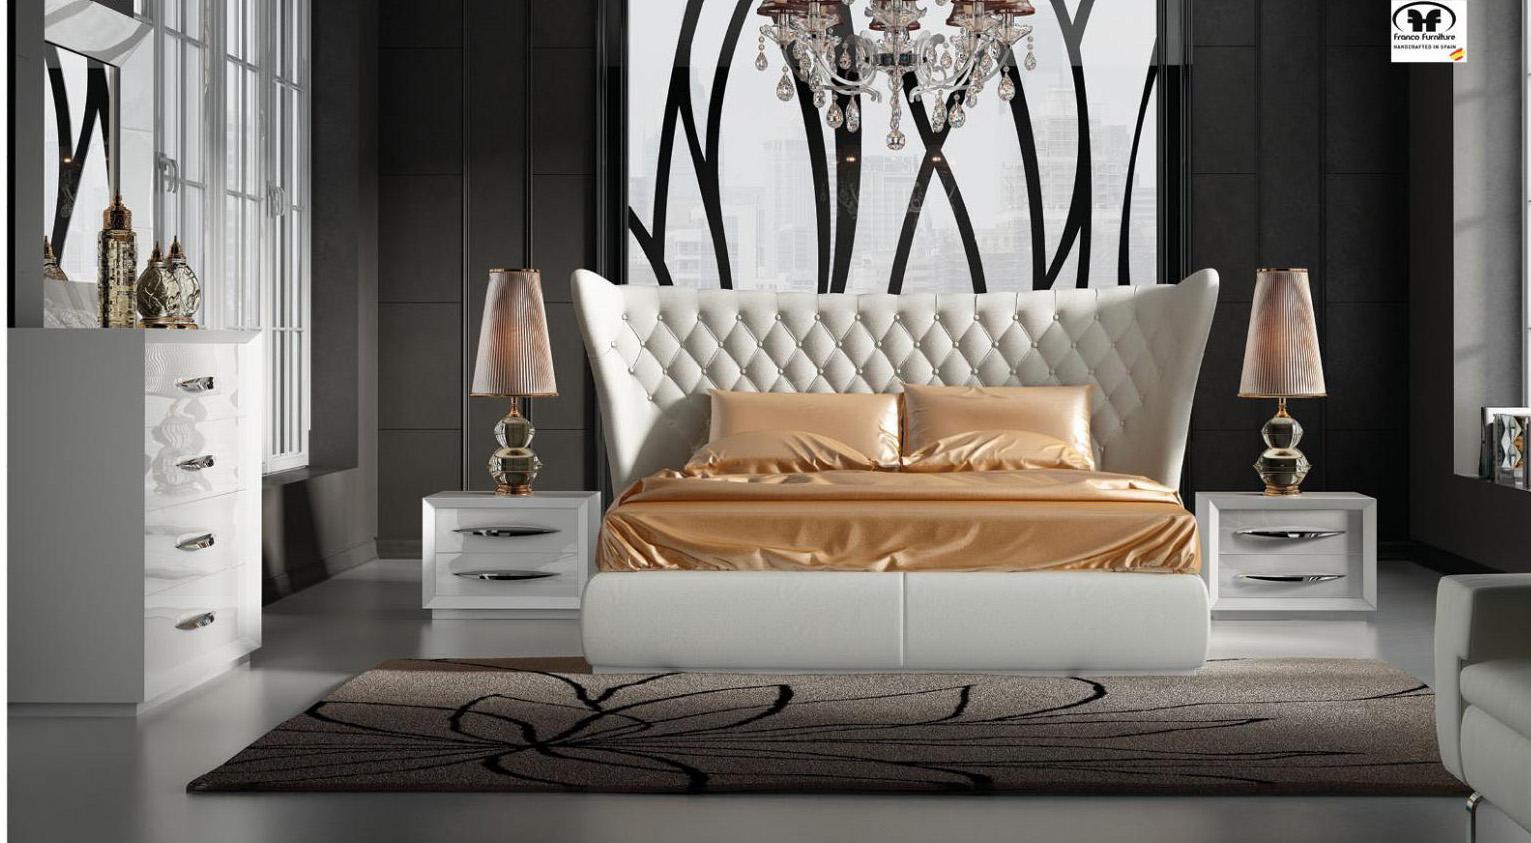 

    
Button Tufted Wing HB White Rone KING Bedroom Set 5Pcs Contemporary Modern
